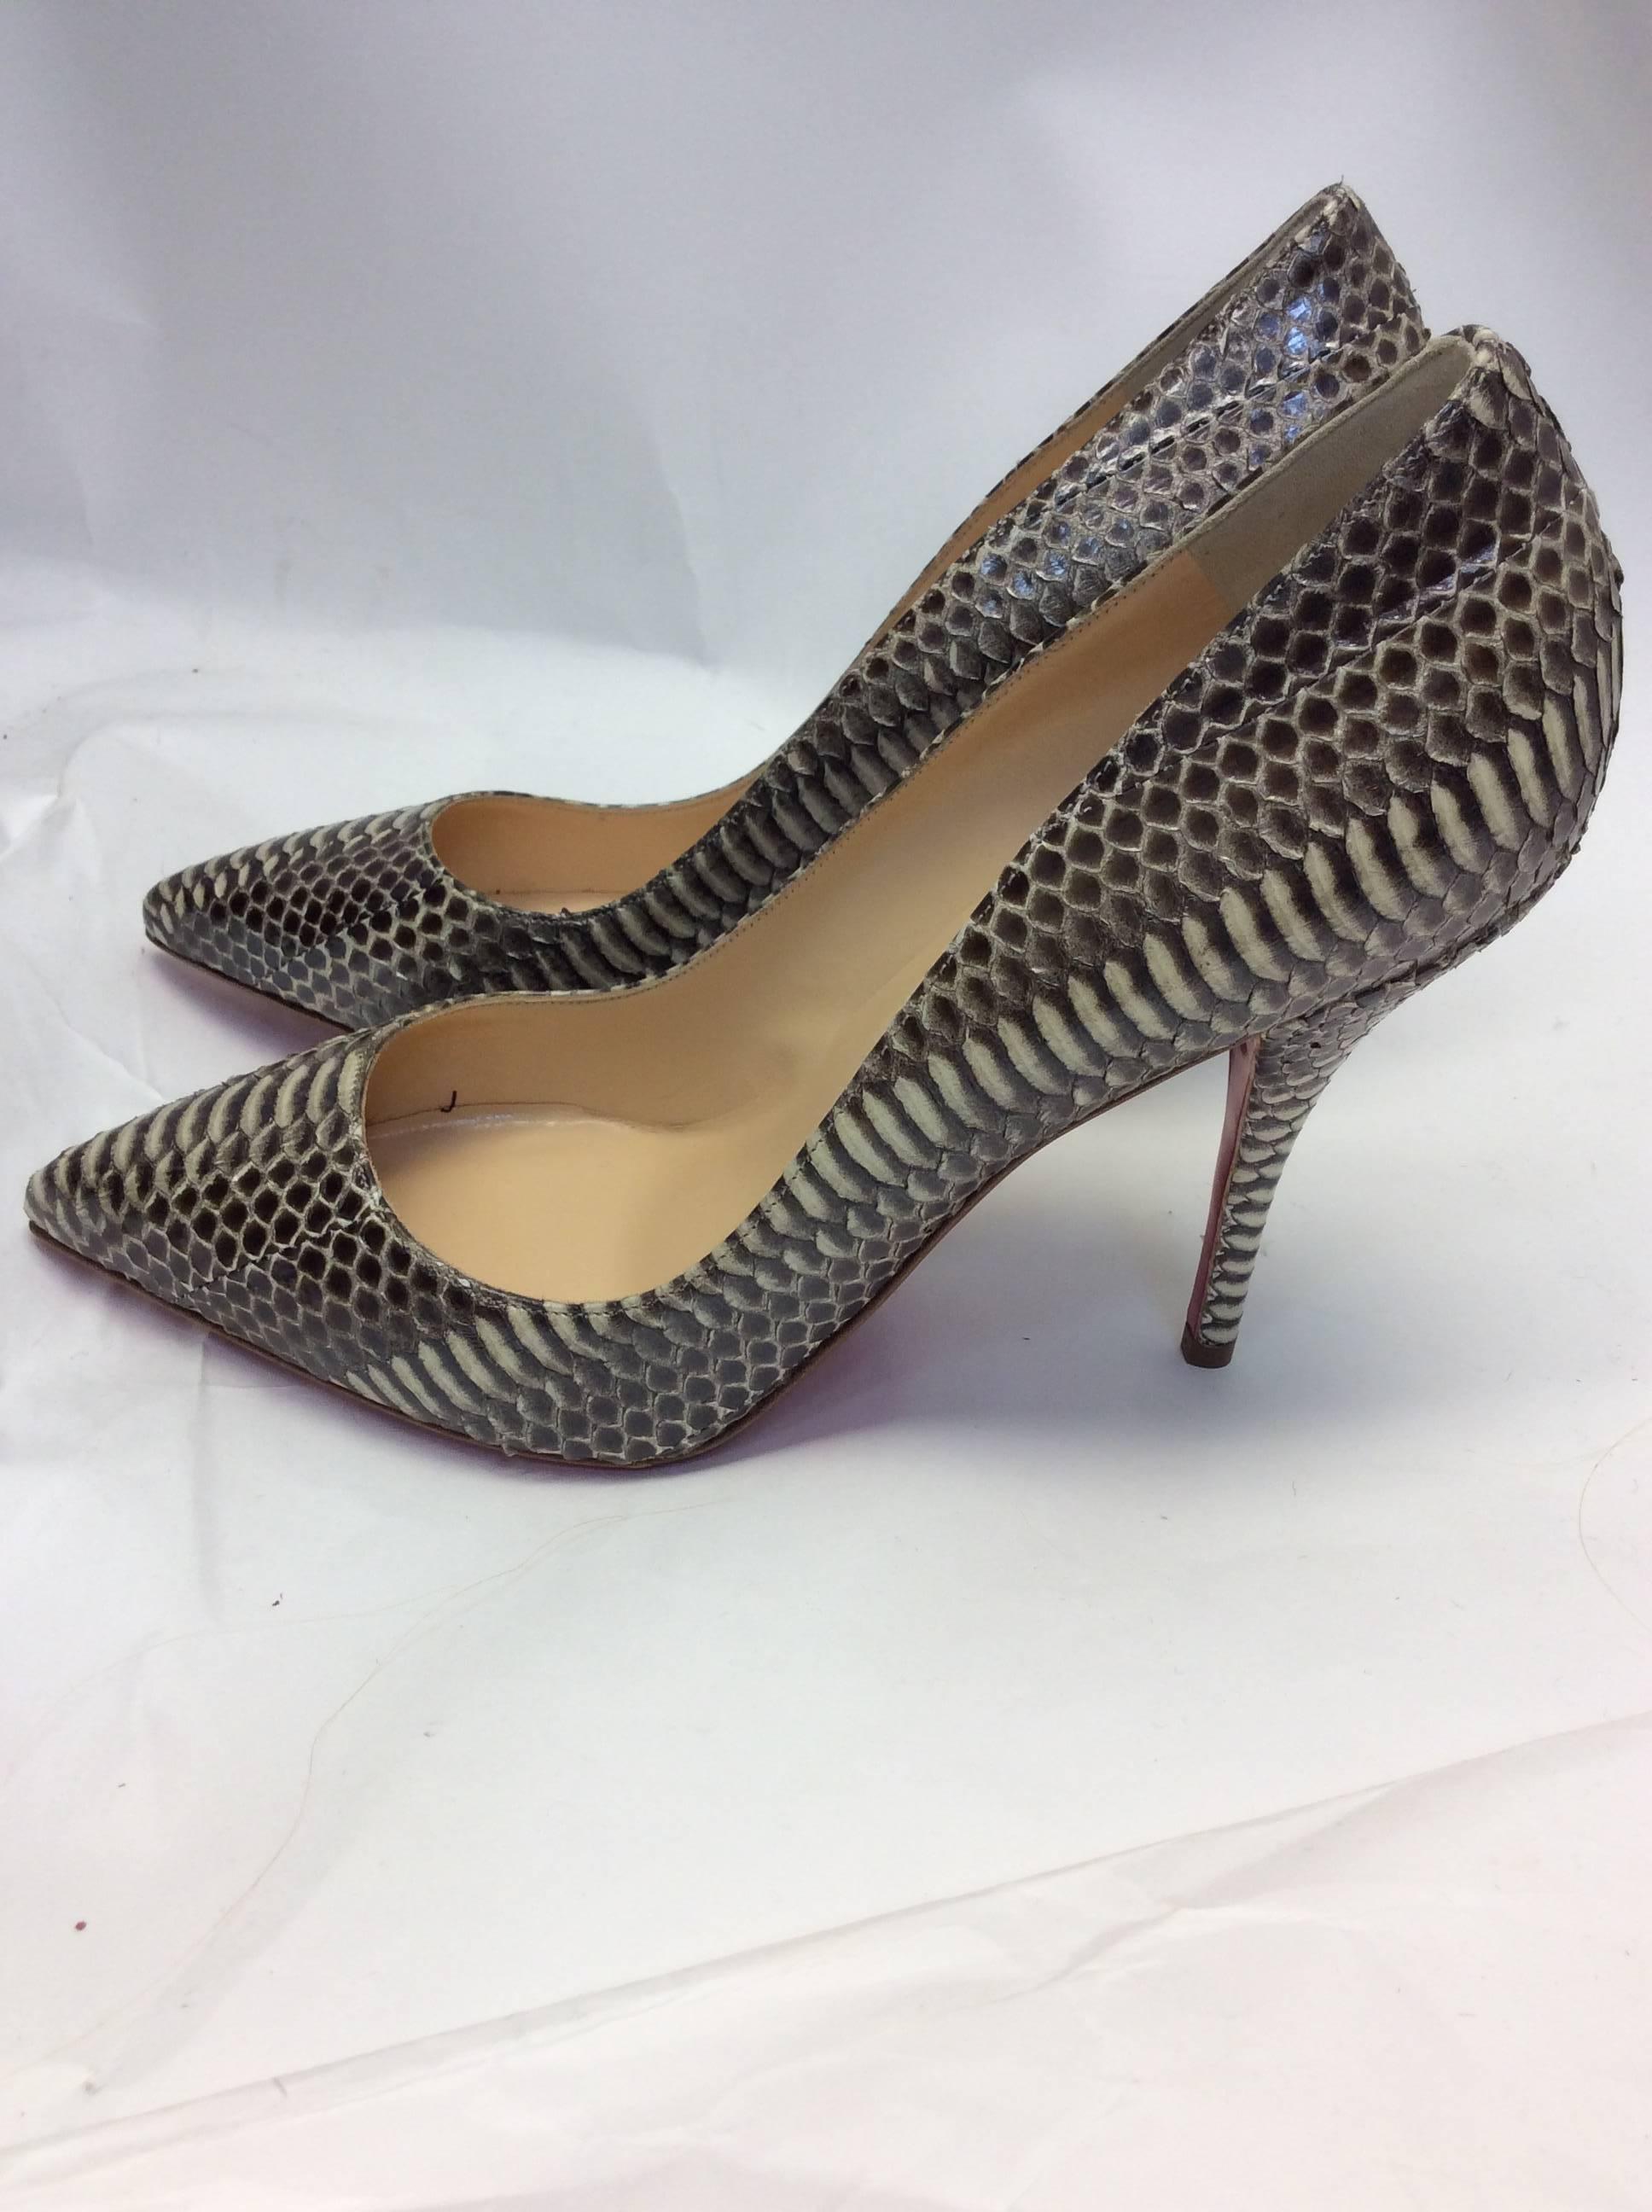 Christian Louboutin NWT Python Pump
Size 37.5
$756
4 inch heel
Made in Italy

